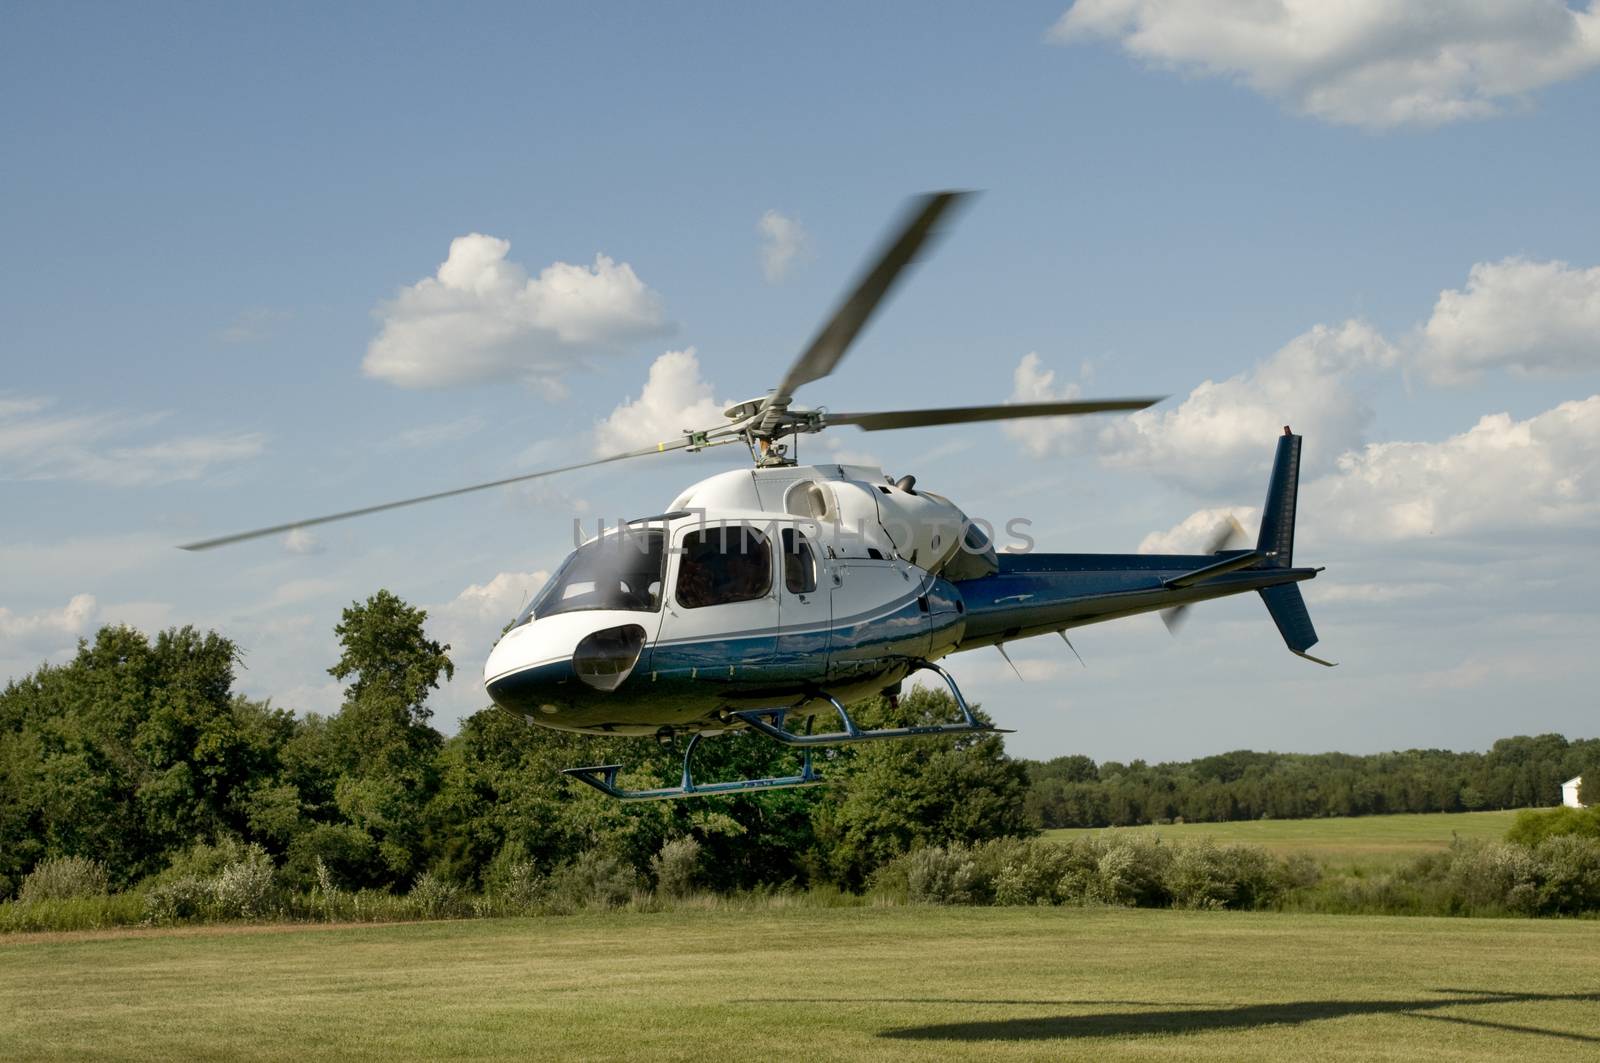 Helicopter taking off or landing in a field by Balefire9